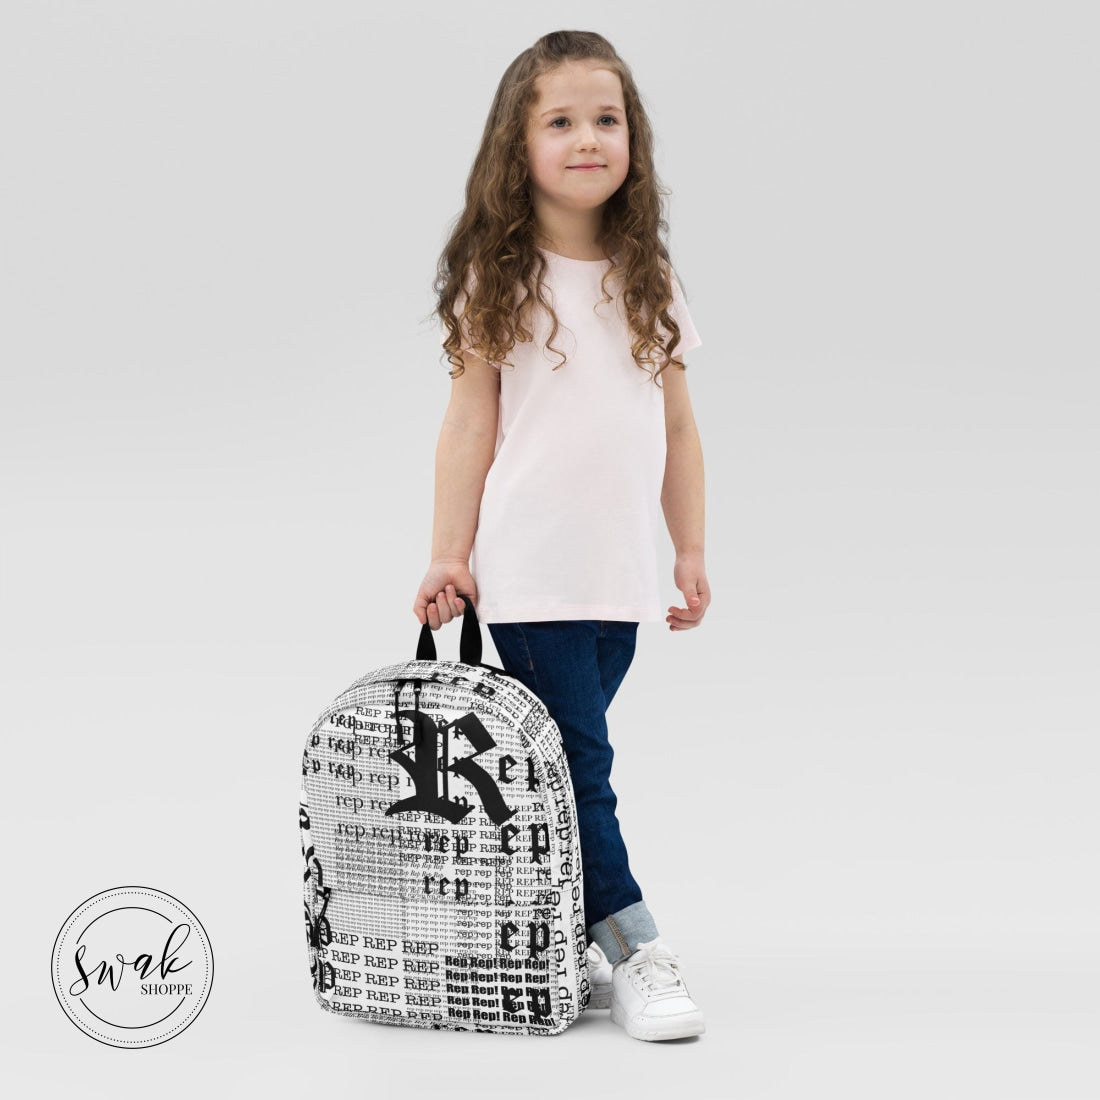 Rep Newsprint Type Backpack With Pocket